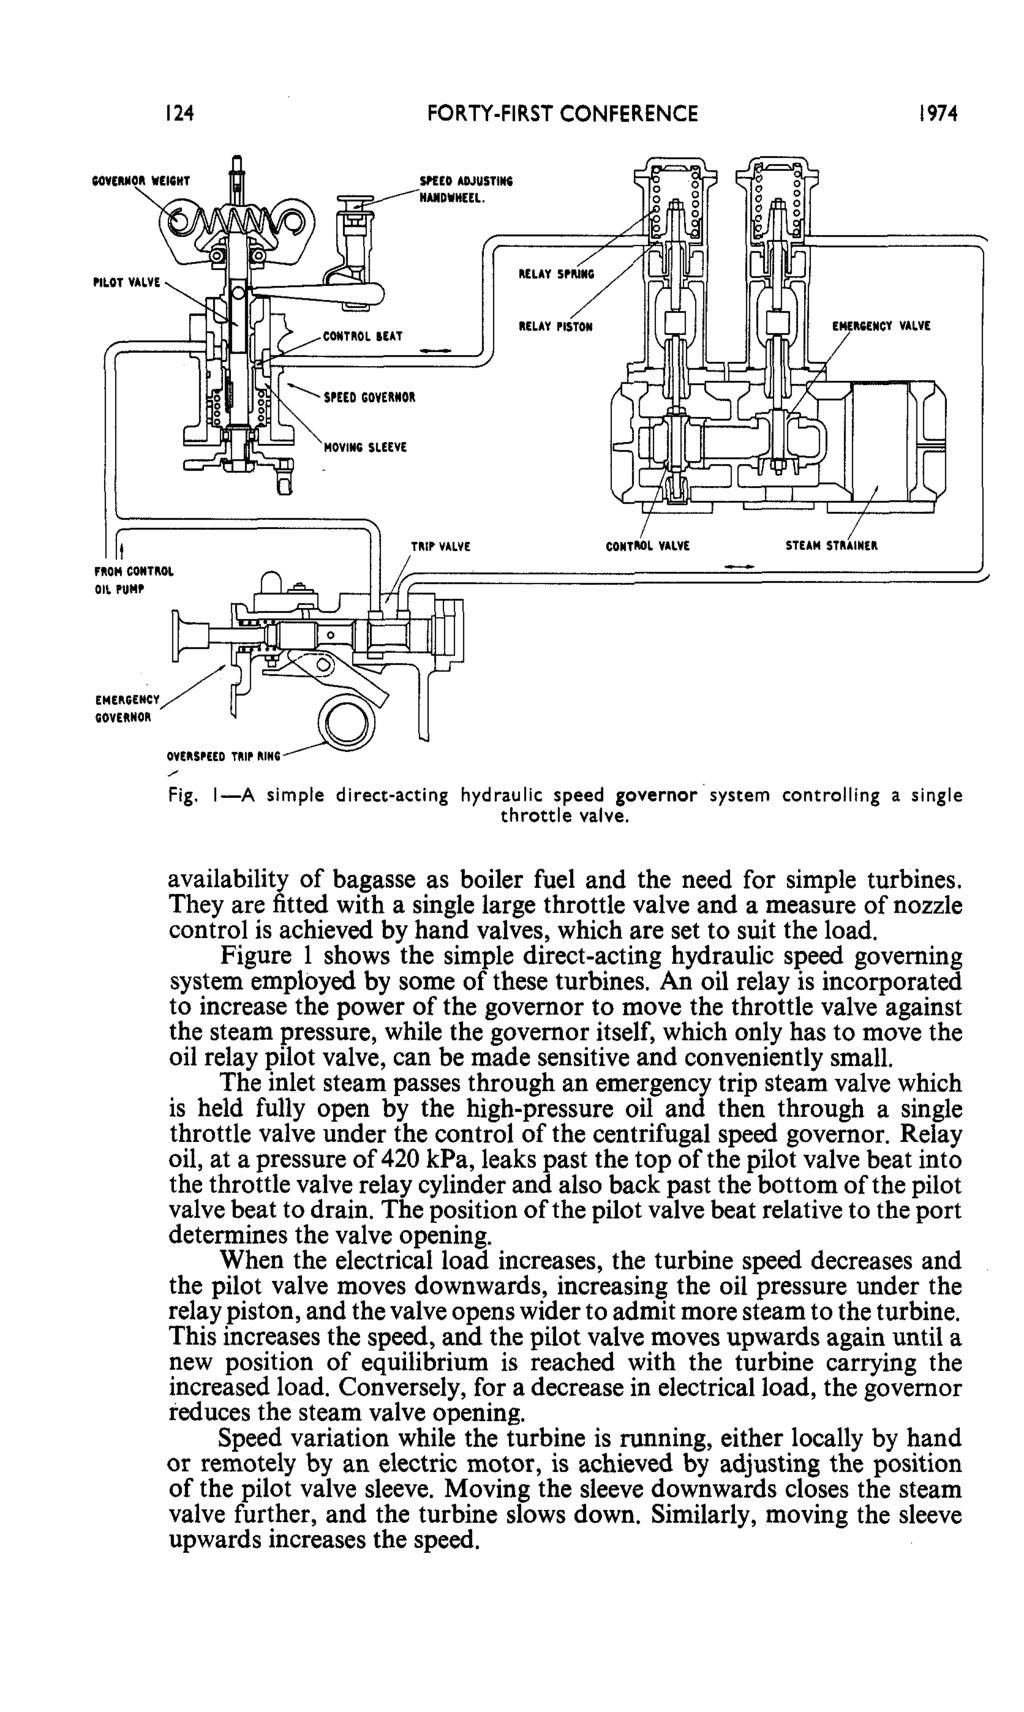 1 24 FORM-FIRST CONFERENCE 1974 Fwn contwn OIL runr EWLRCENCY CoVLRNOn, Fig. I-A simple direct-acting hydraulic speed governor system controlling a single throttle valve.